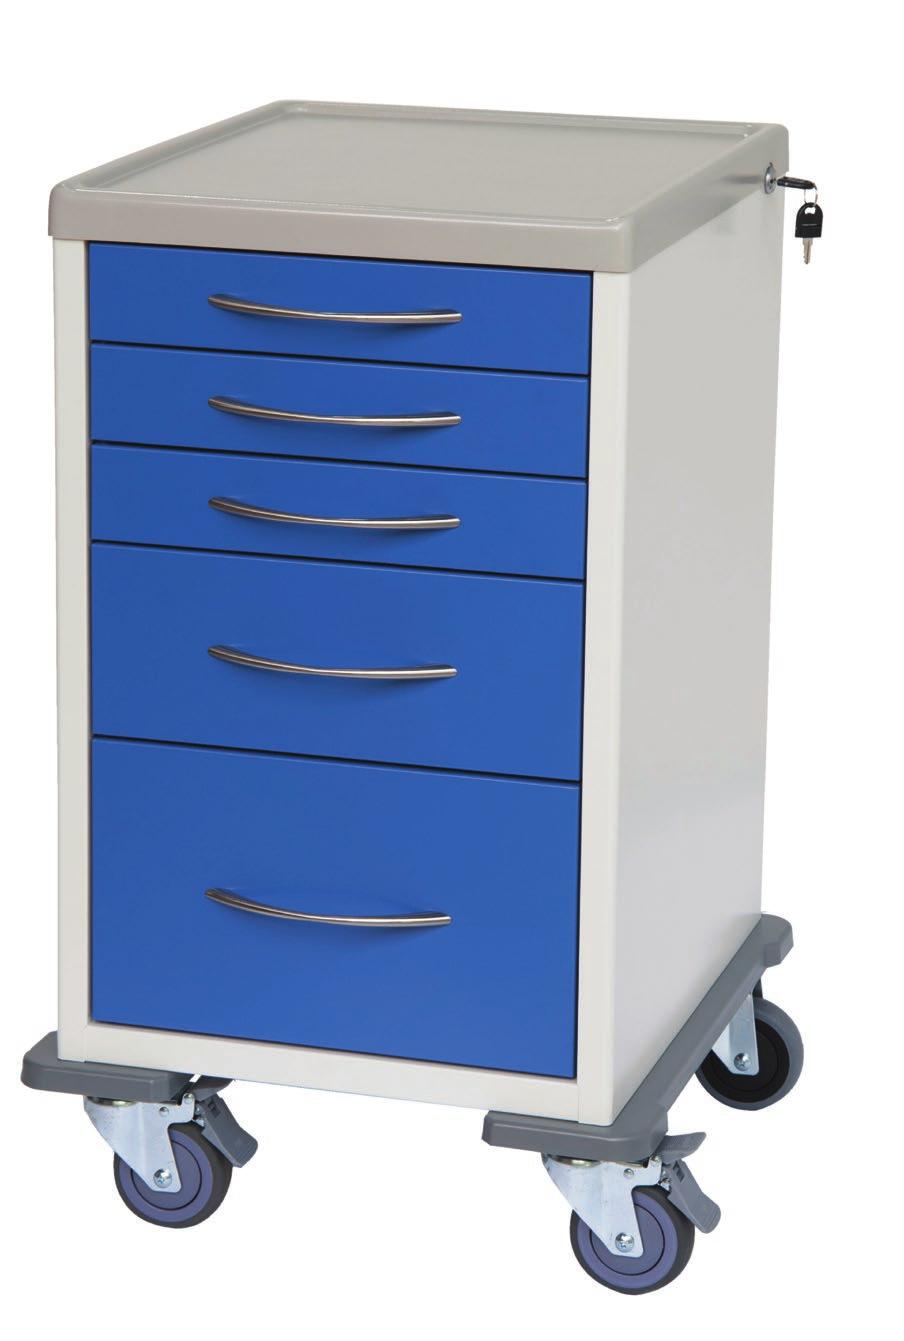 TROLLEYS Clini-Cart Narrow Storage Trolley Much like our Slimline Clini-Cart, this trolley is designed to maximise storage space. The cart offers great value without sacrificing quality.